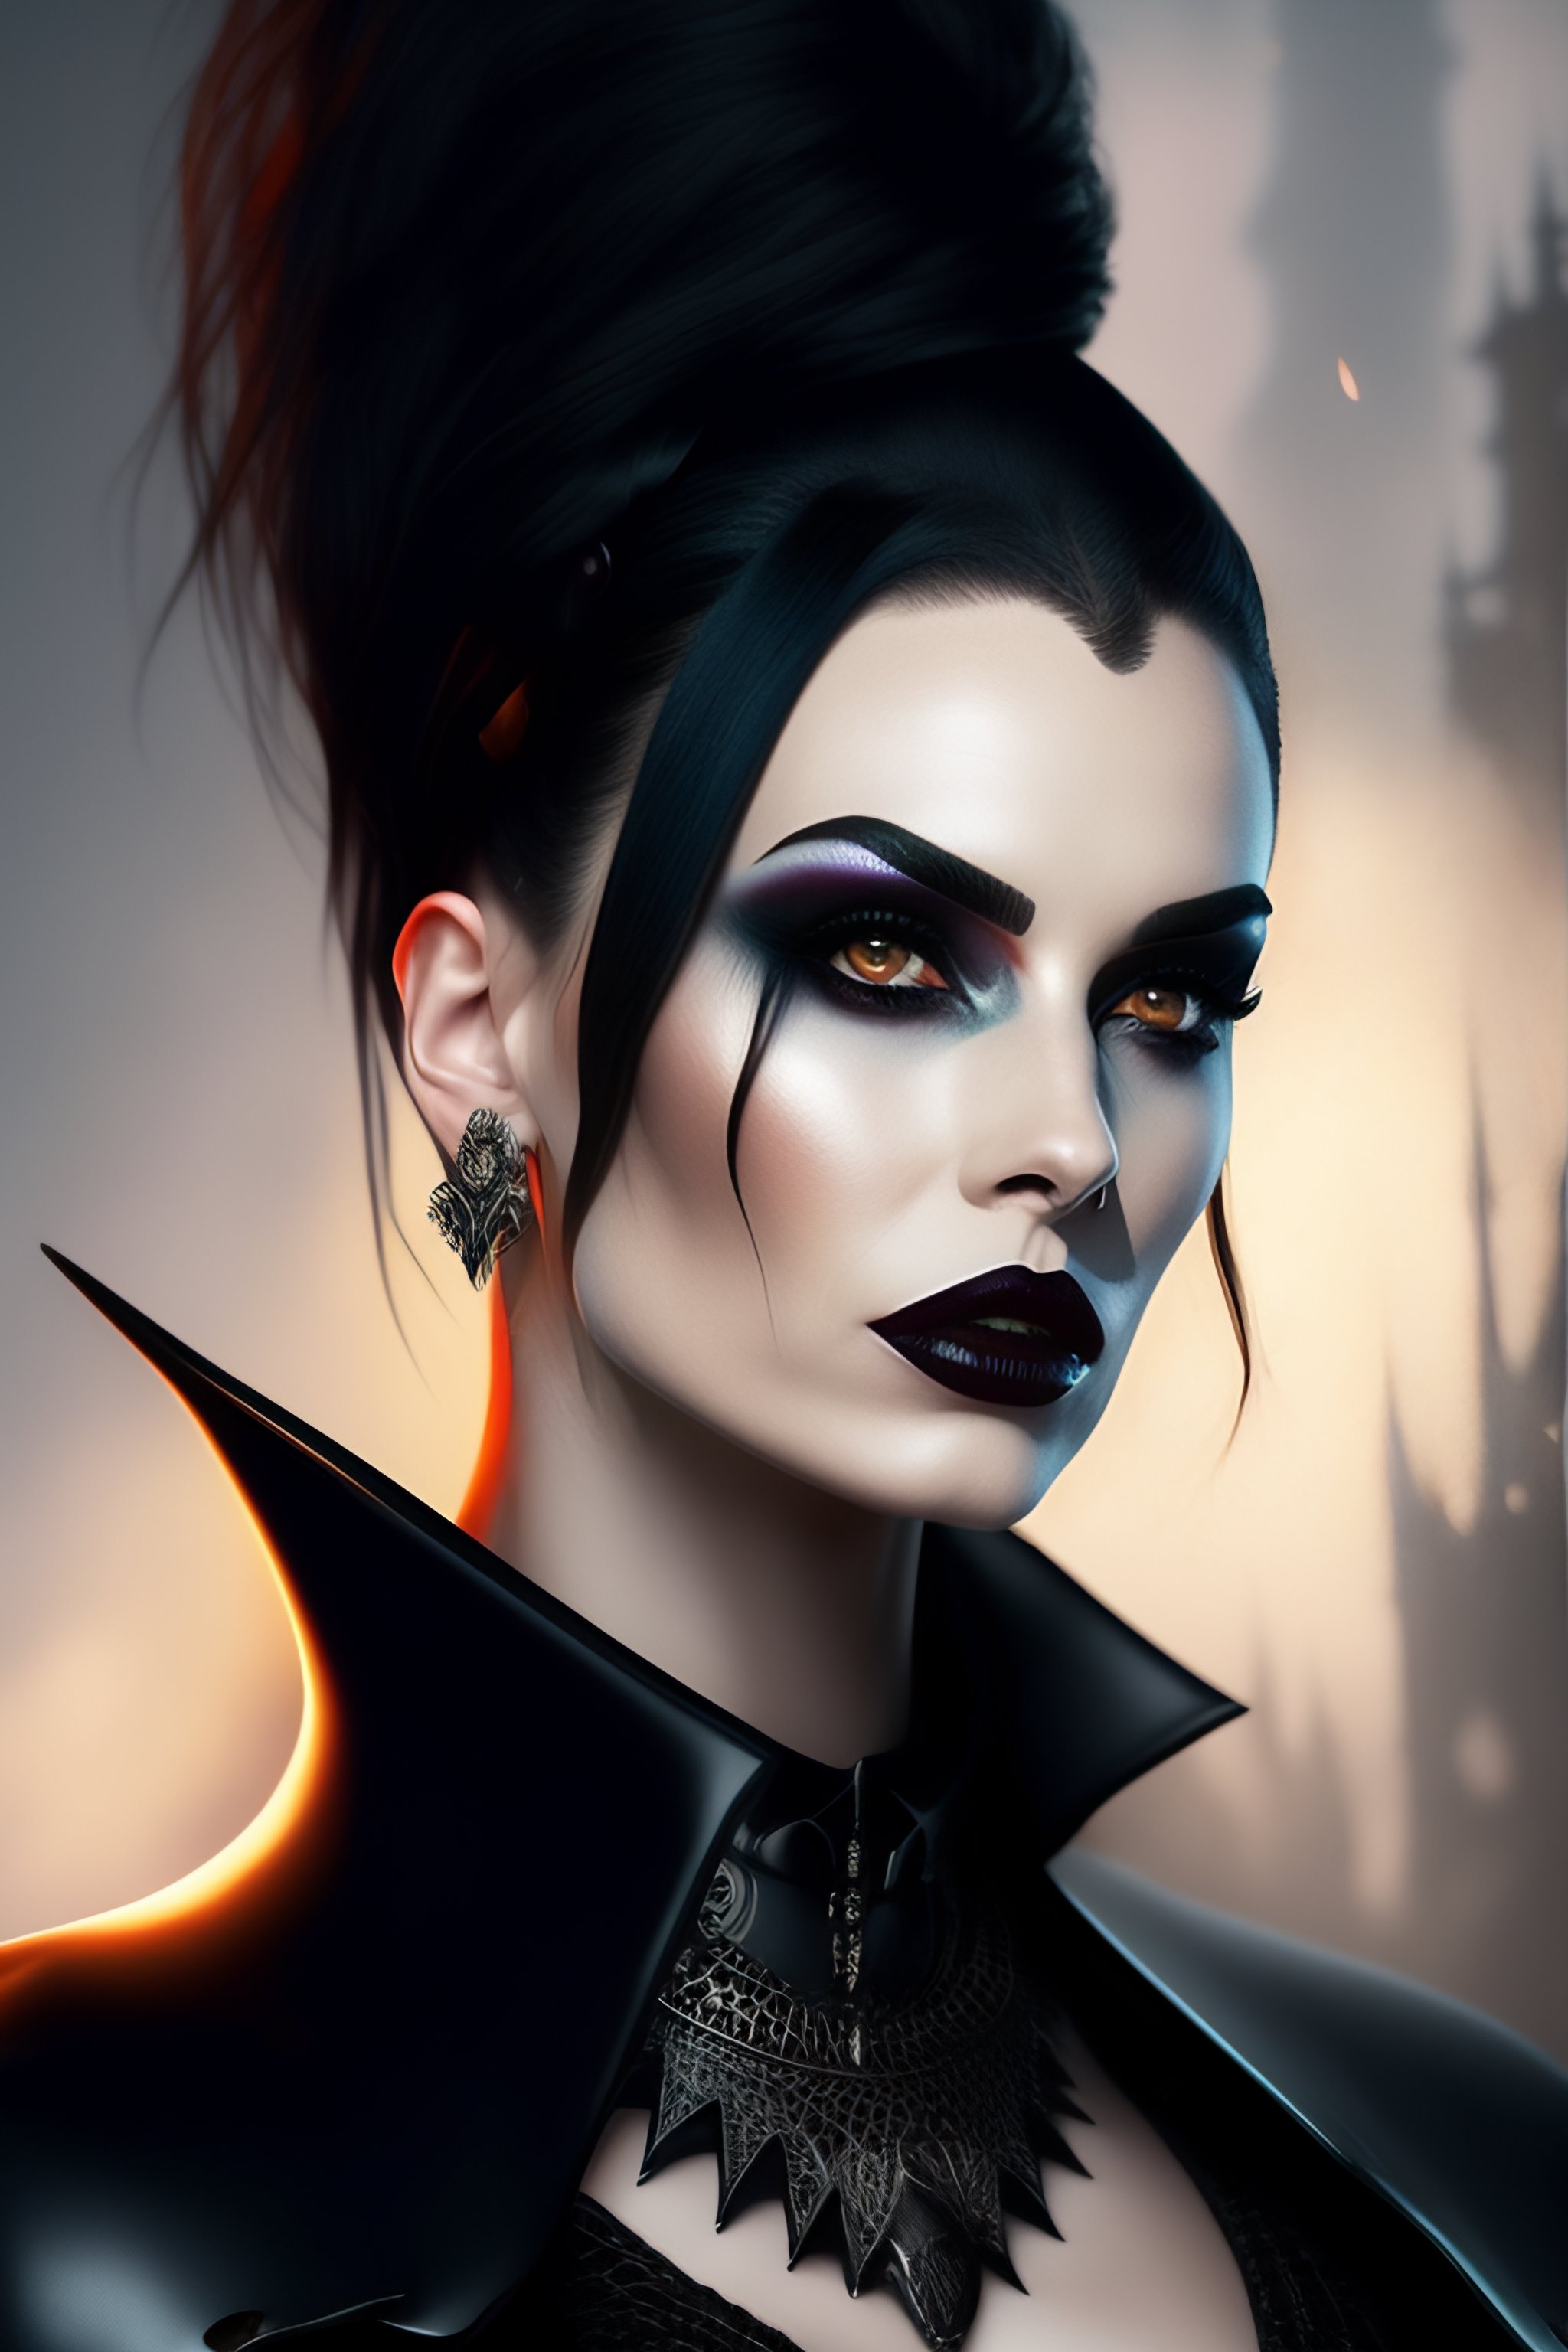 Lexica - Pale woman goth vampire black outfit hair Mohican bats blood